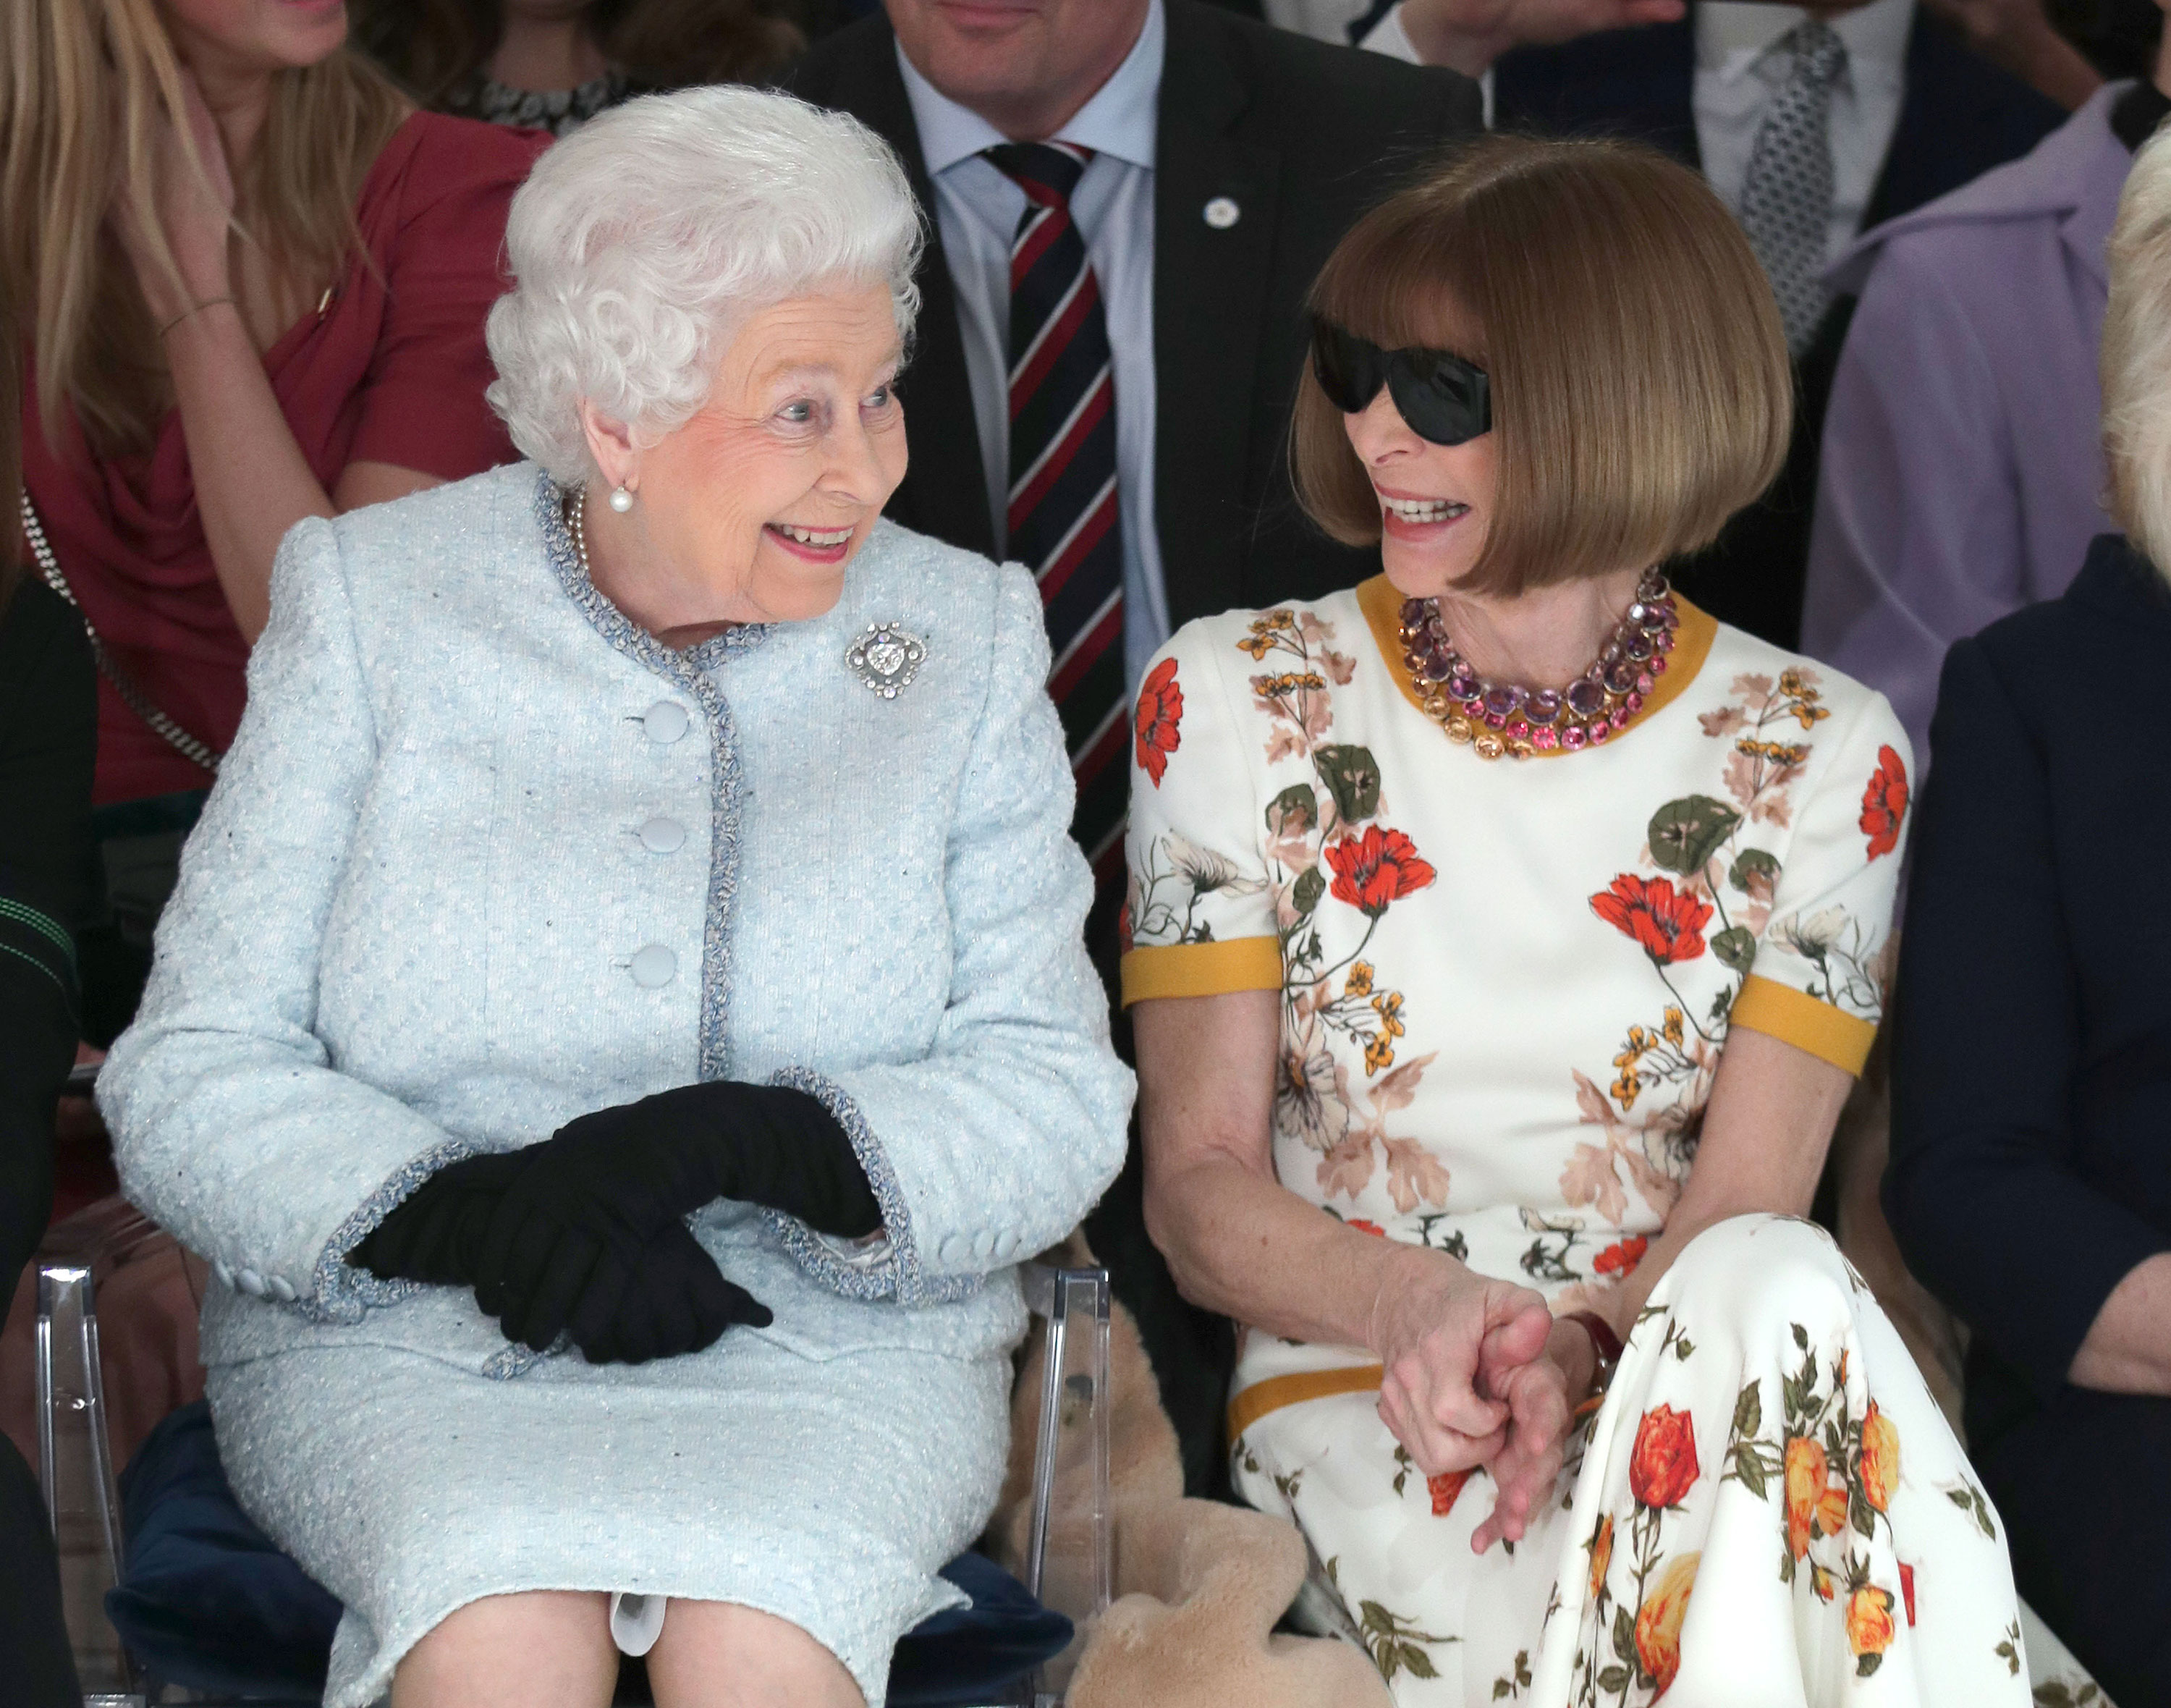 Queen Elizabeth sits next to Anna Wintour as they view Richard Quinn's runway show in February 2018 in London.